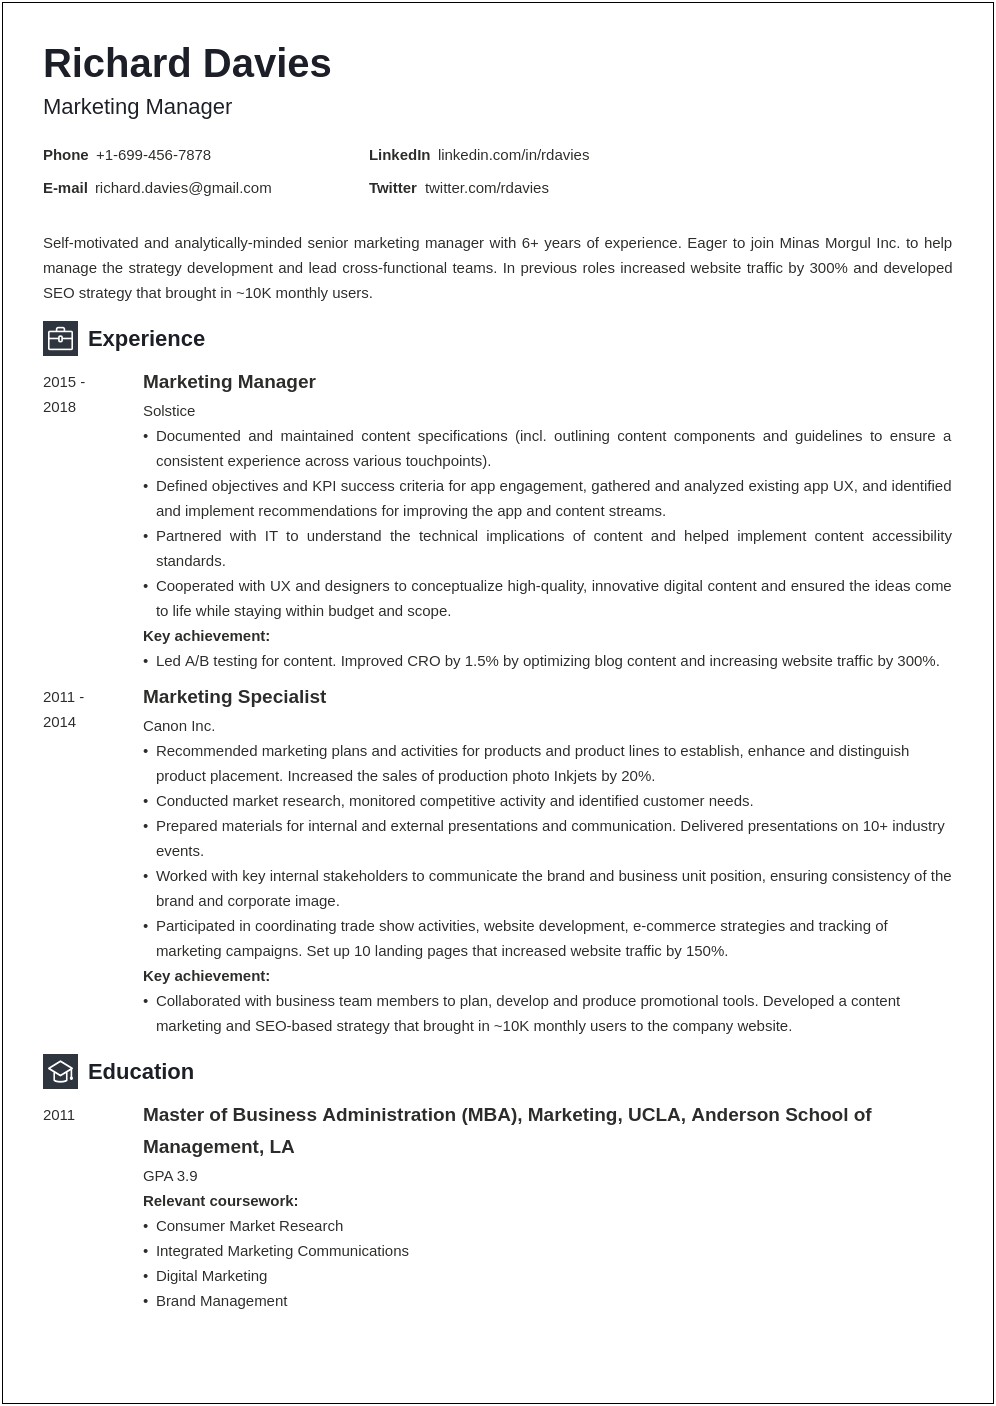 Resume For Marketing Job With No Experience